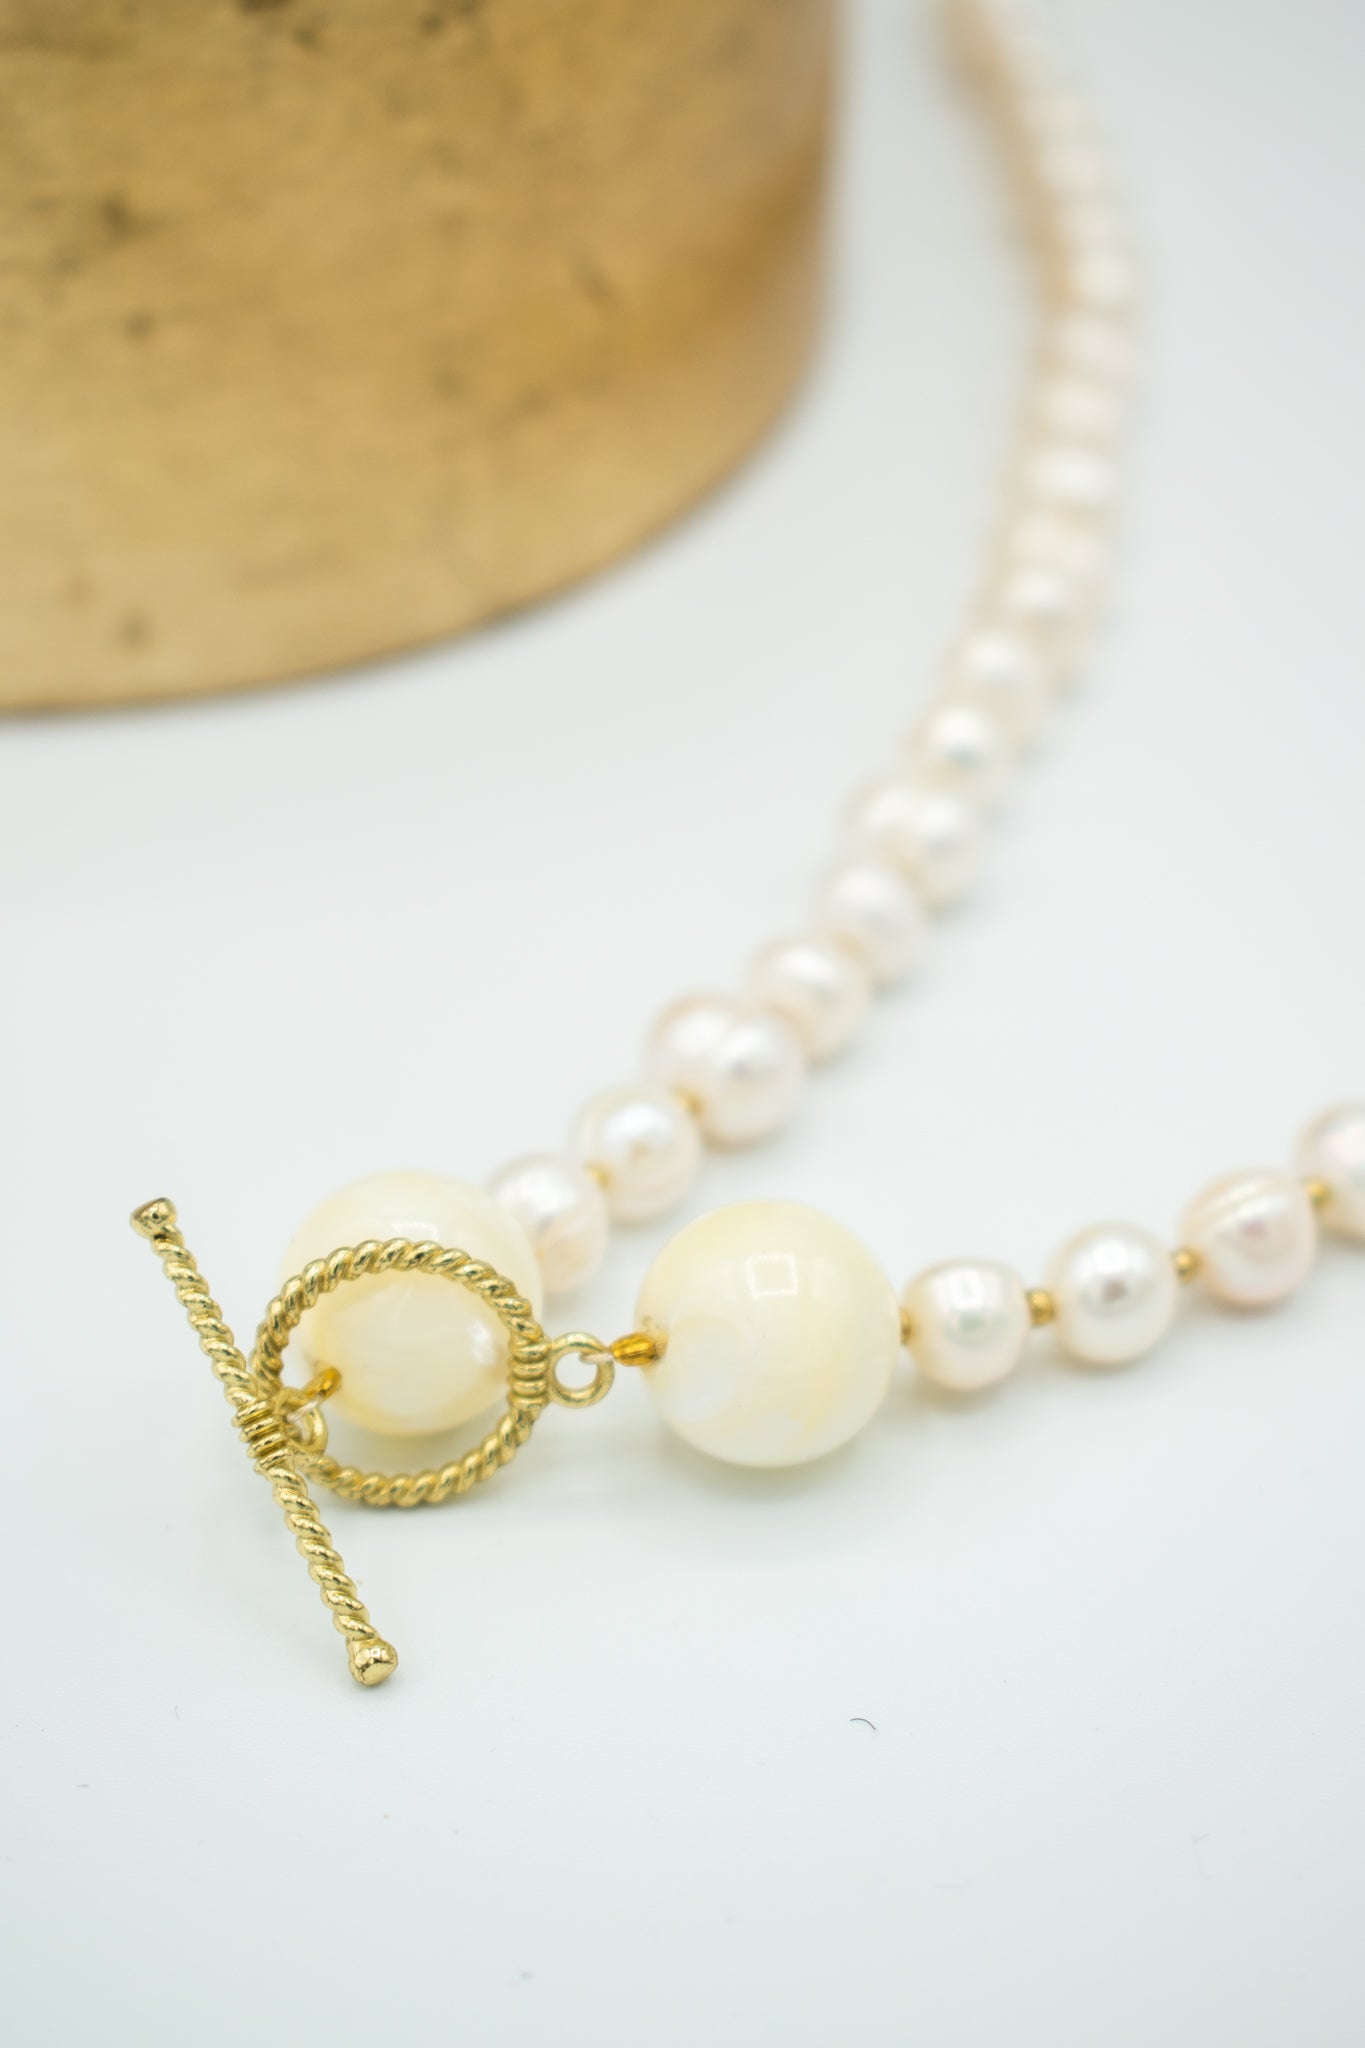 How to Use a Safety Clasp on Your Pearl Necklace: A Step-by-Step Guide -  The Pearl Source - YouTube